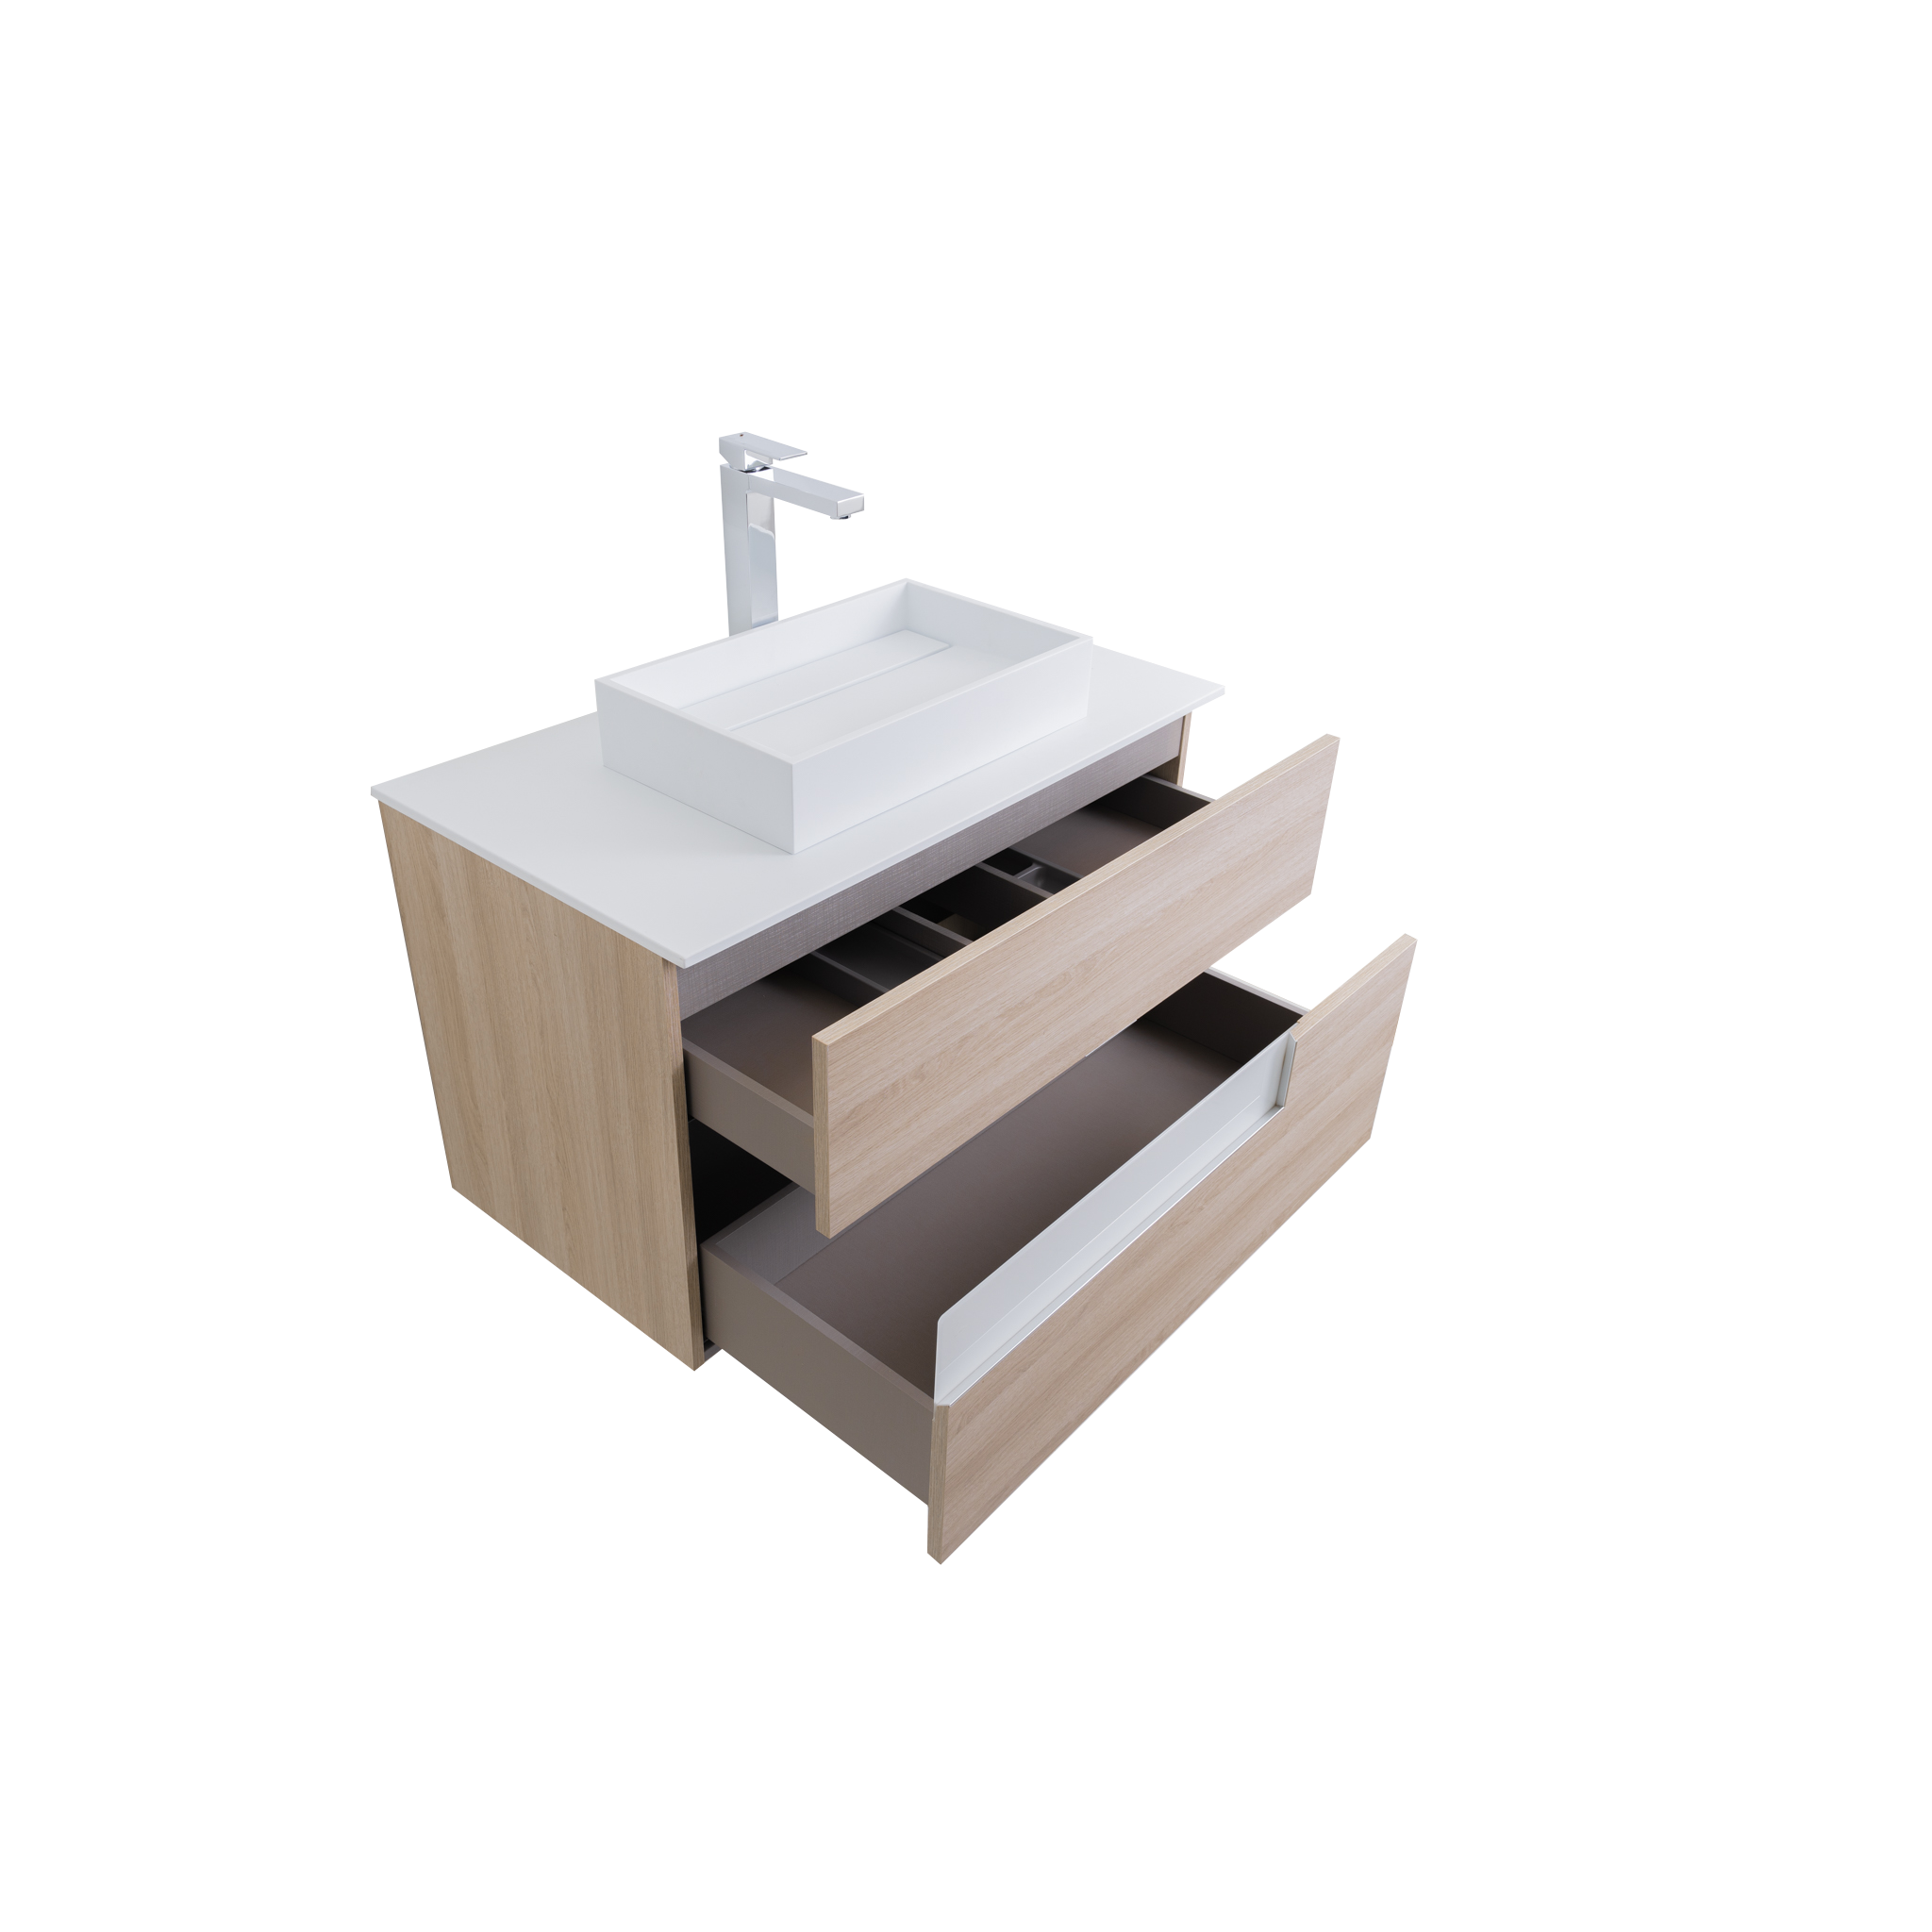 Vision 35.5 Natural Light Wood Cabinet, Solid Surface Flat White Counter And Infinity Square Solid Surface White Basin 1329, Wall Mounted Modern Vanity Set